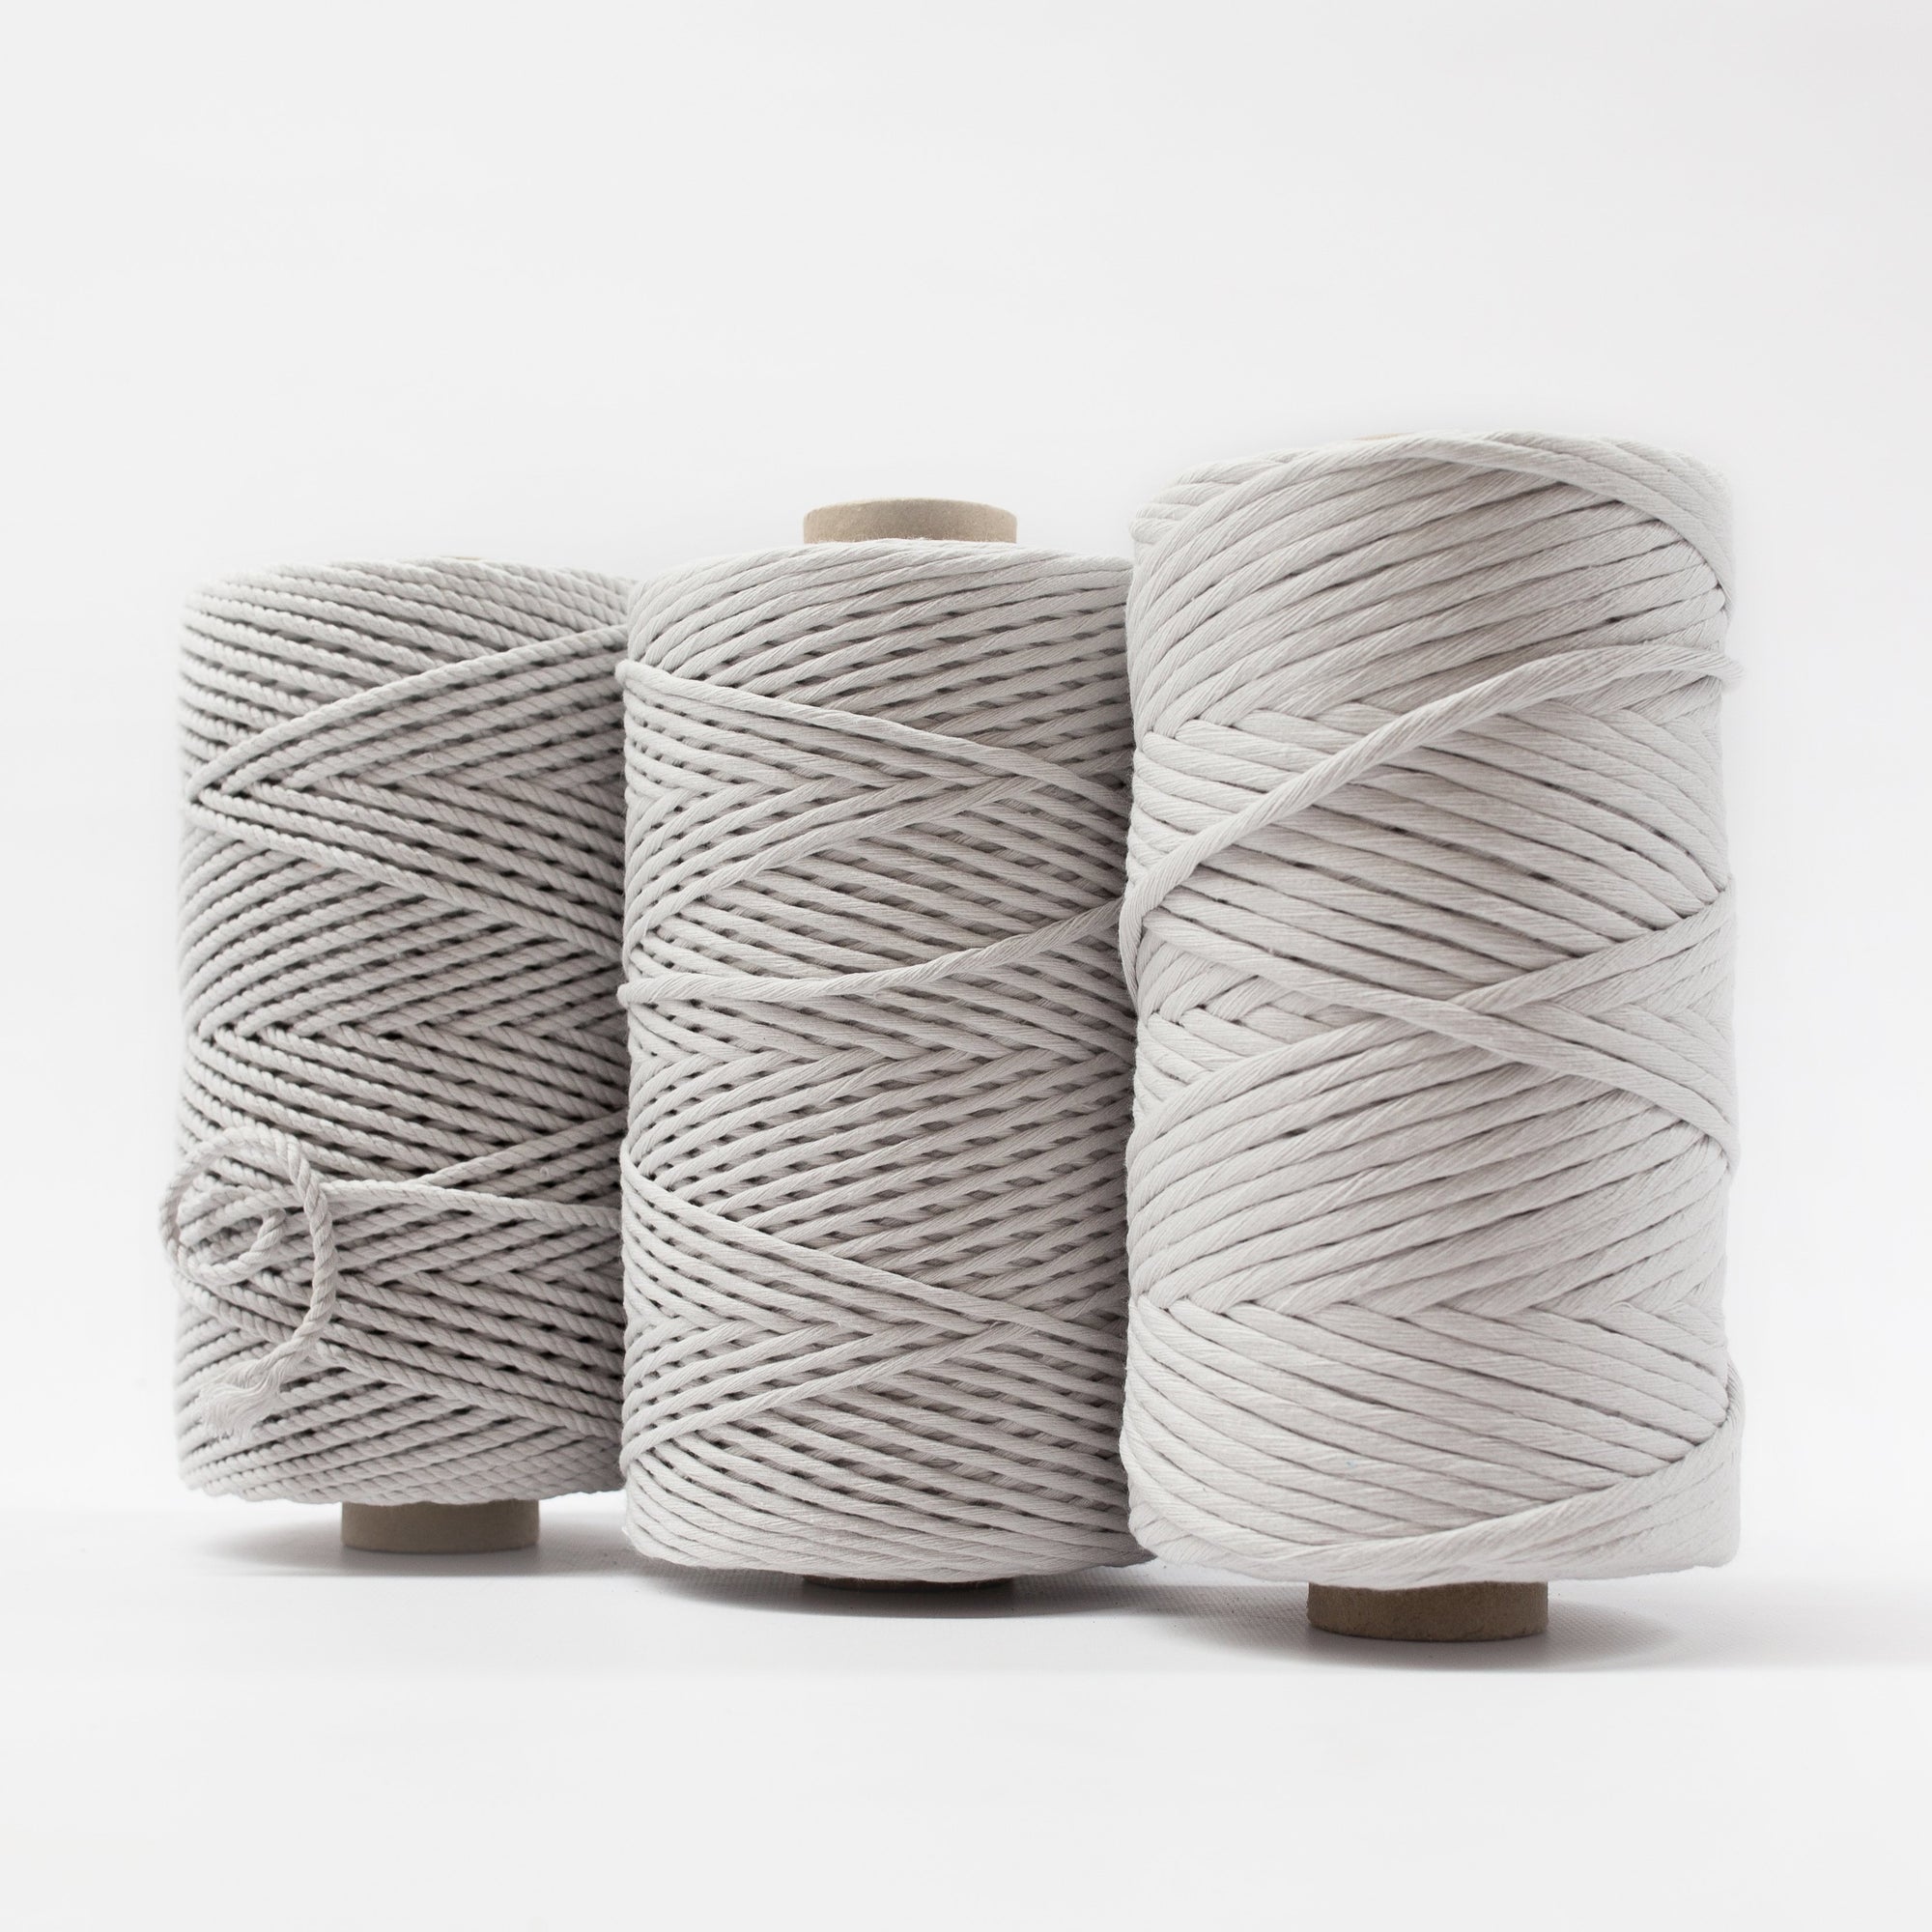 Mary Maker Studio Luxe Colour Cotton 4mm 1KG Recycled Luxe Macrame Rope // Cloud Grey macrame cotton macrame rope macrame workshop macrame patterns macrame